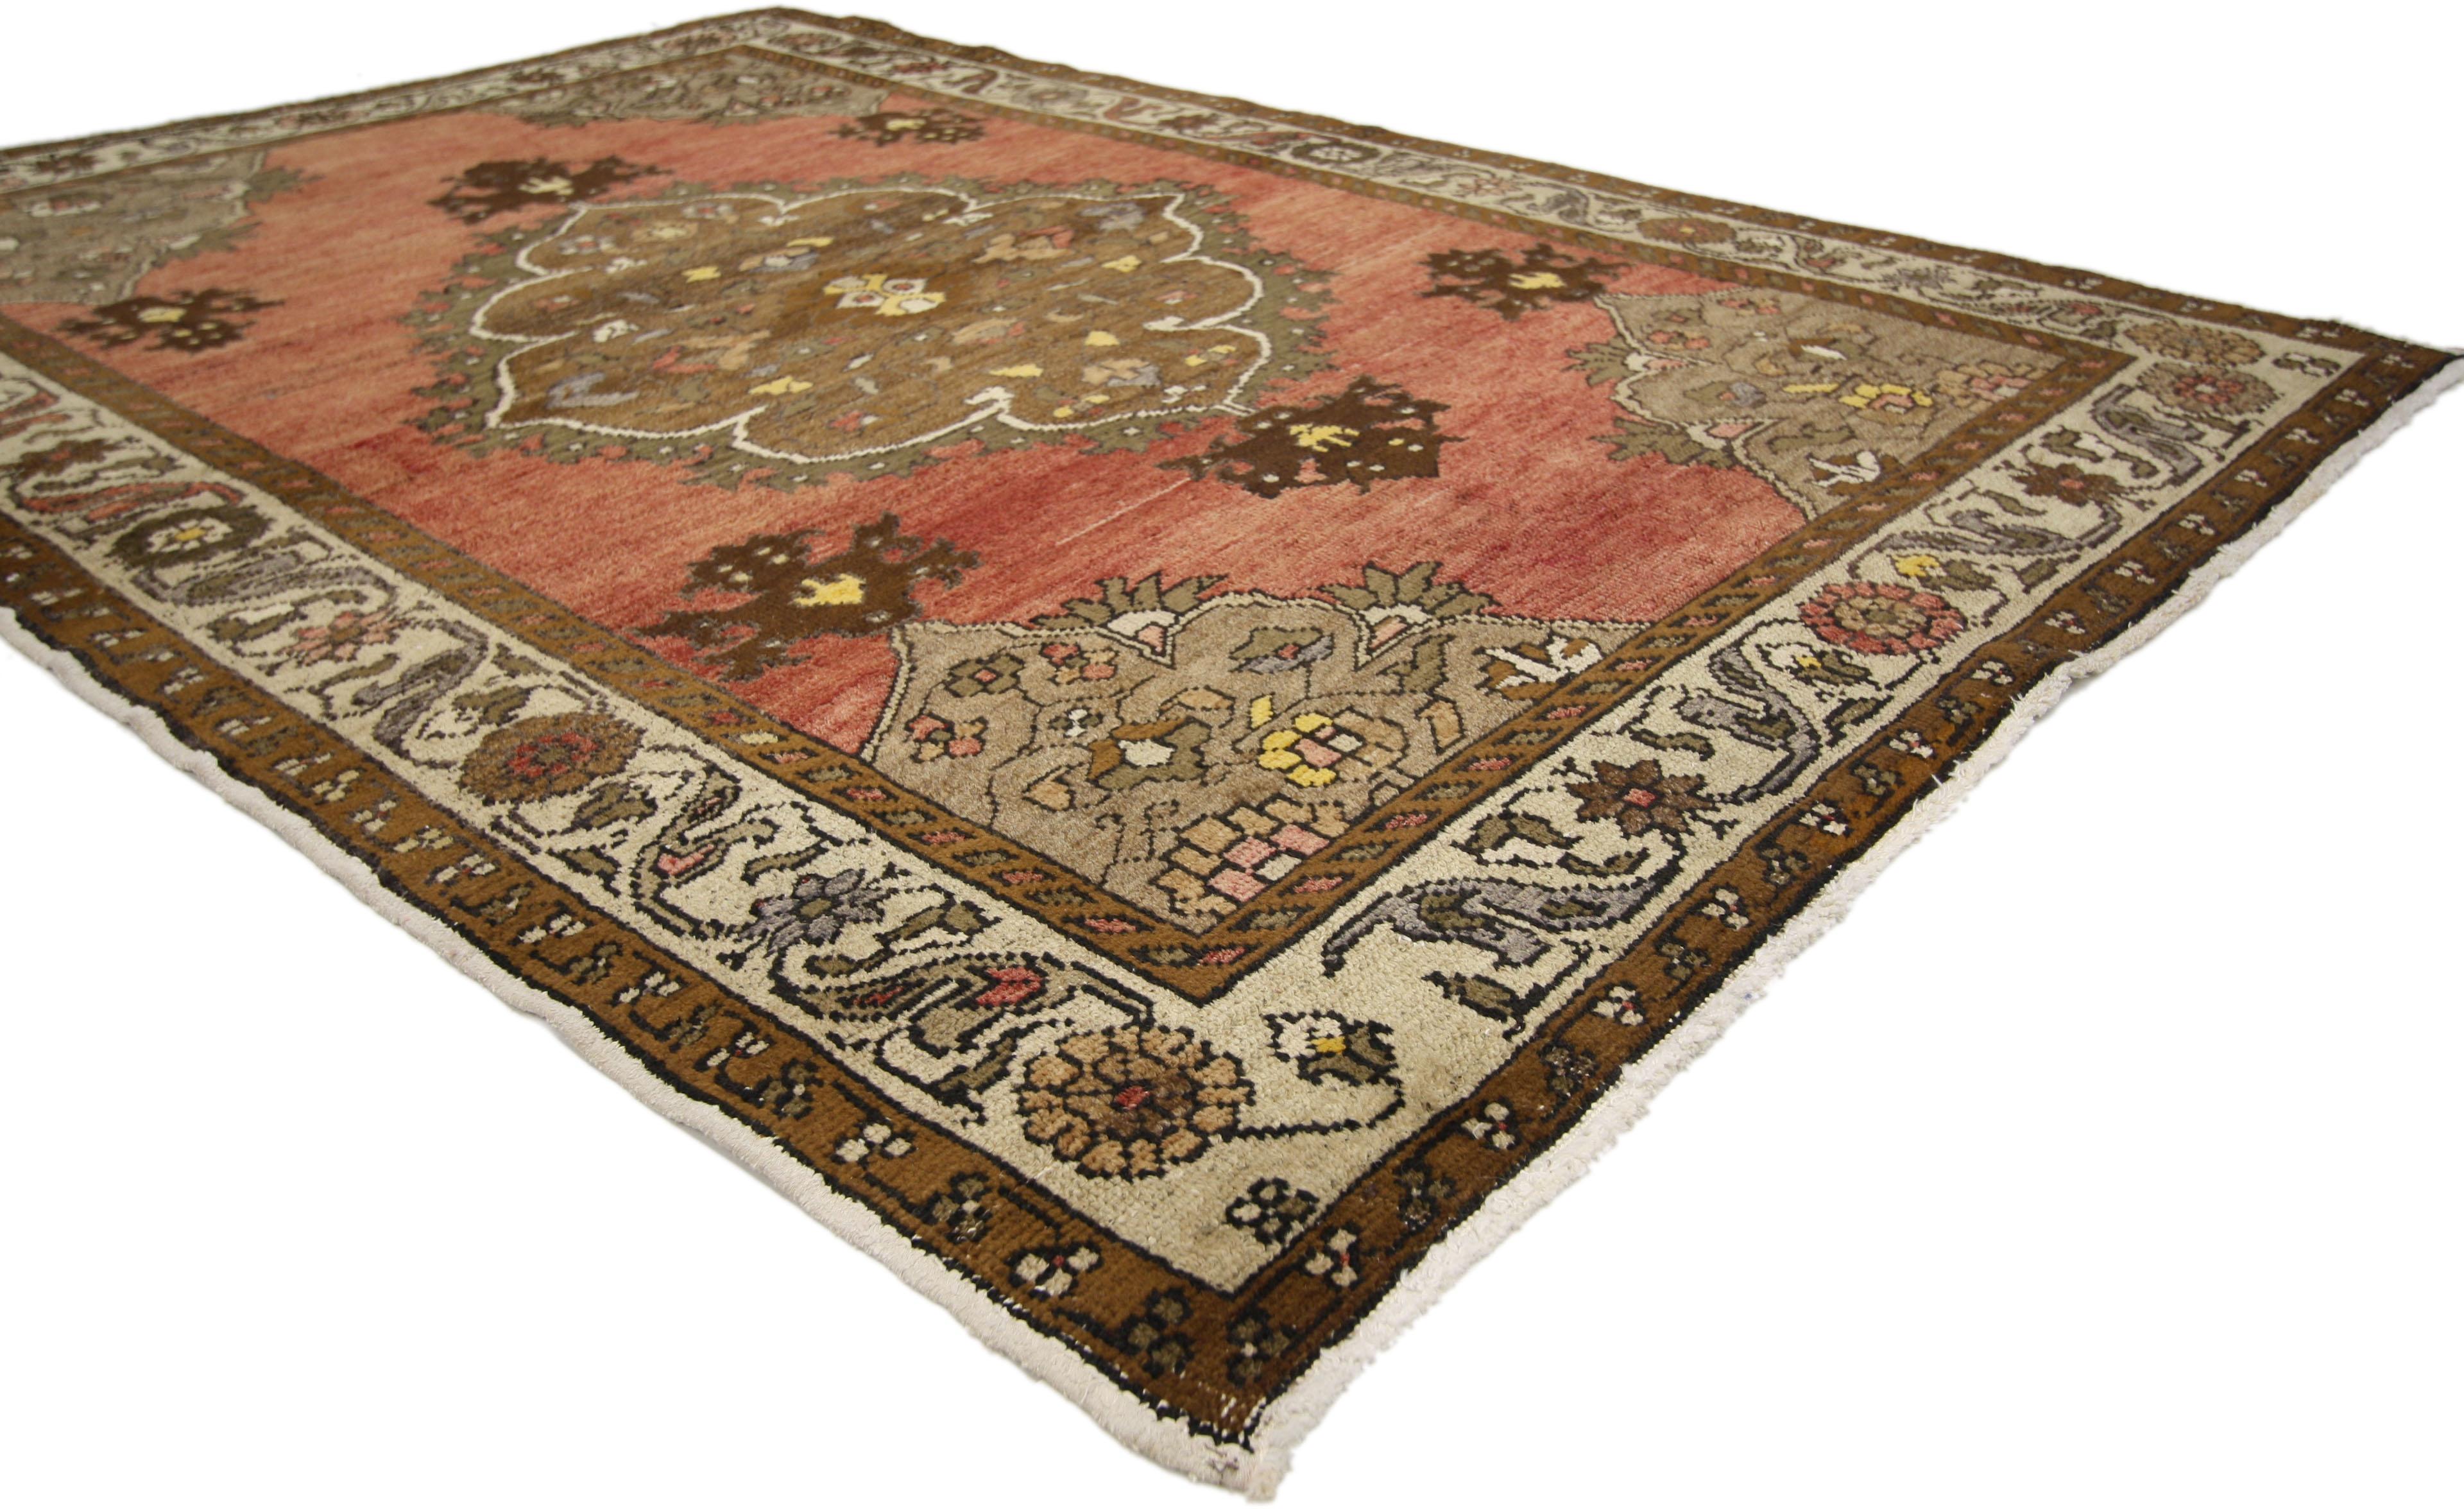 50303 Vintage Turkish Oushak Rug with Traditional Style. Warm and inviting, this hand-knotted wool vintage Turkish Oushak rug features a brown centre medallion in an open abrashed rustic red field and ivory border with color tone variations.